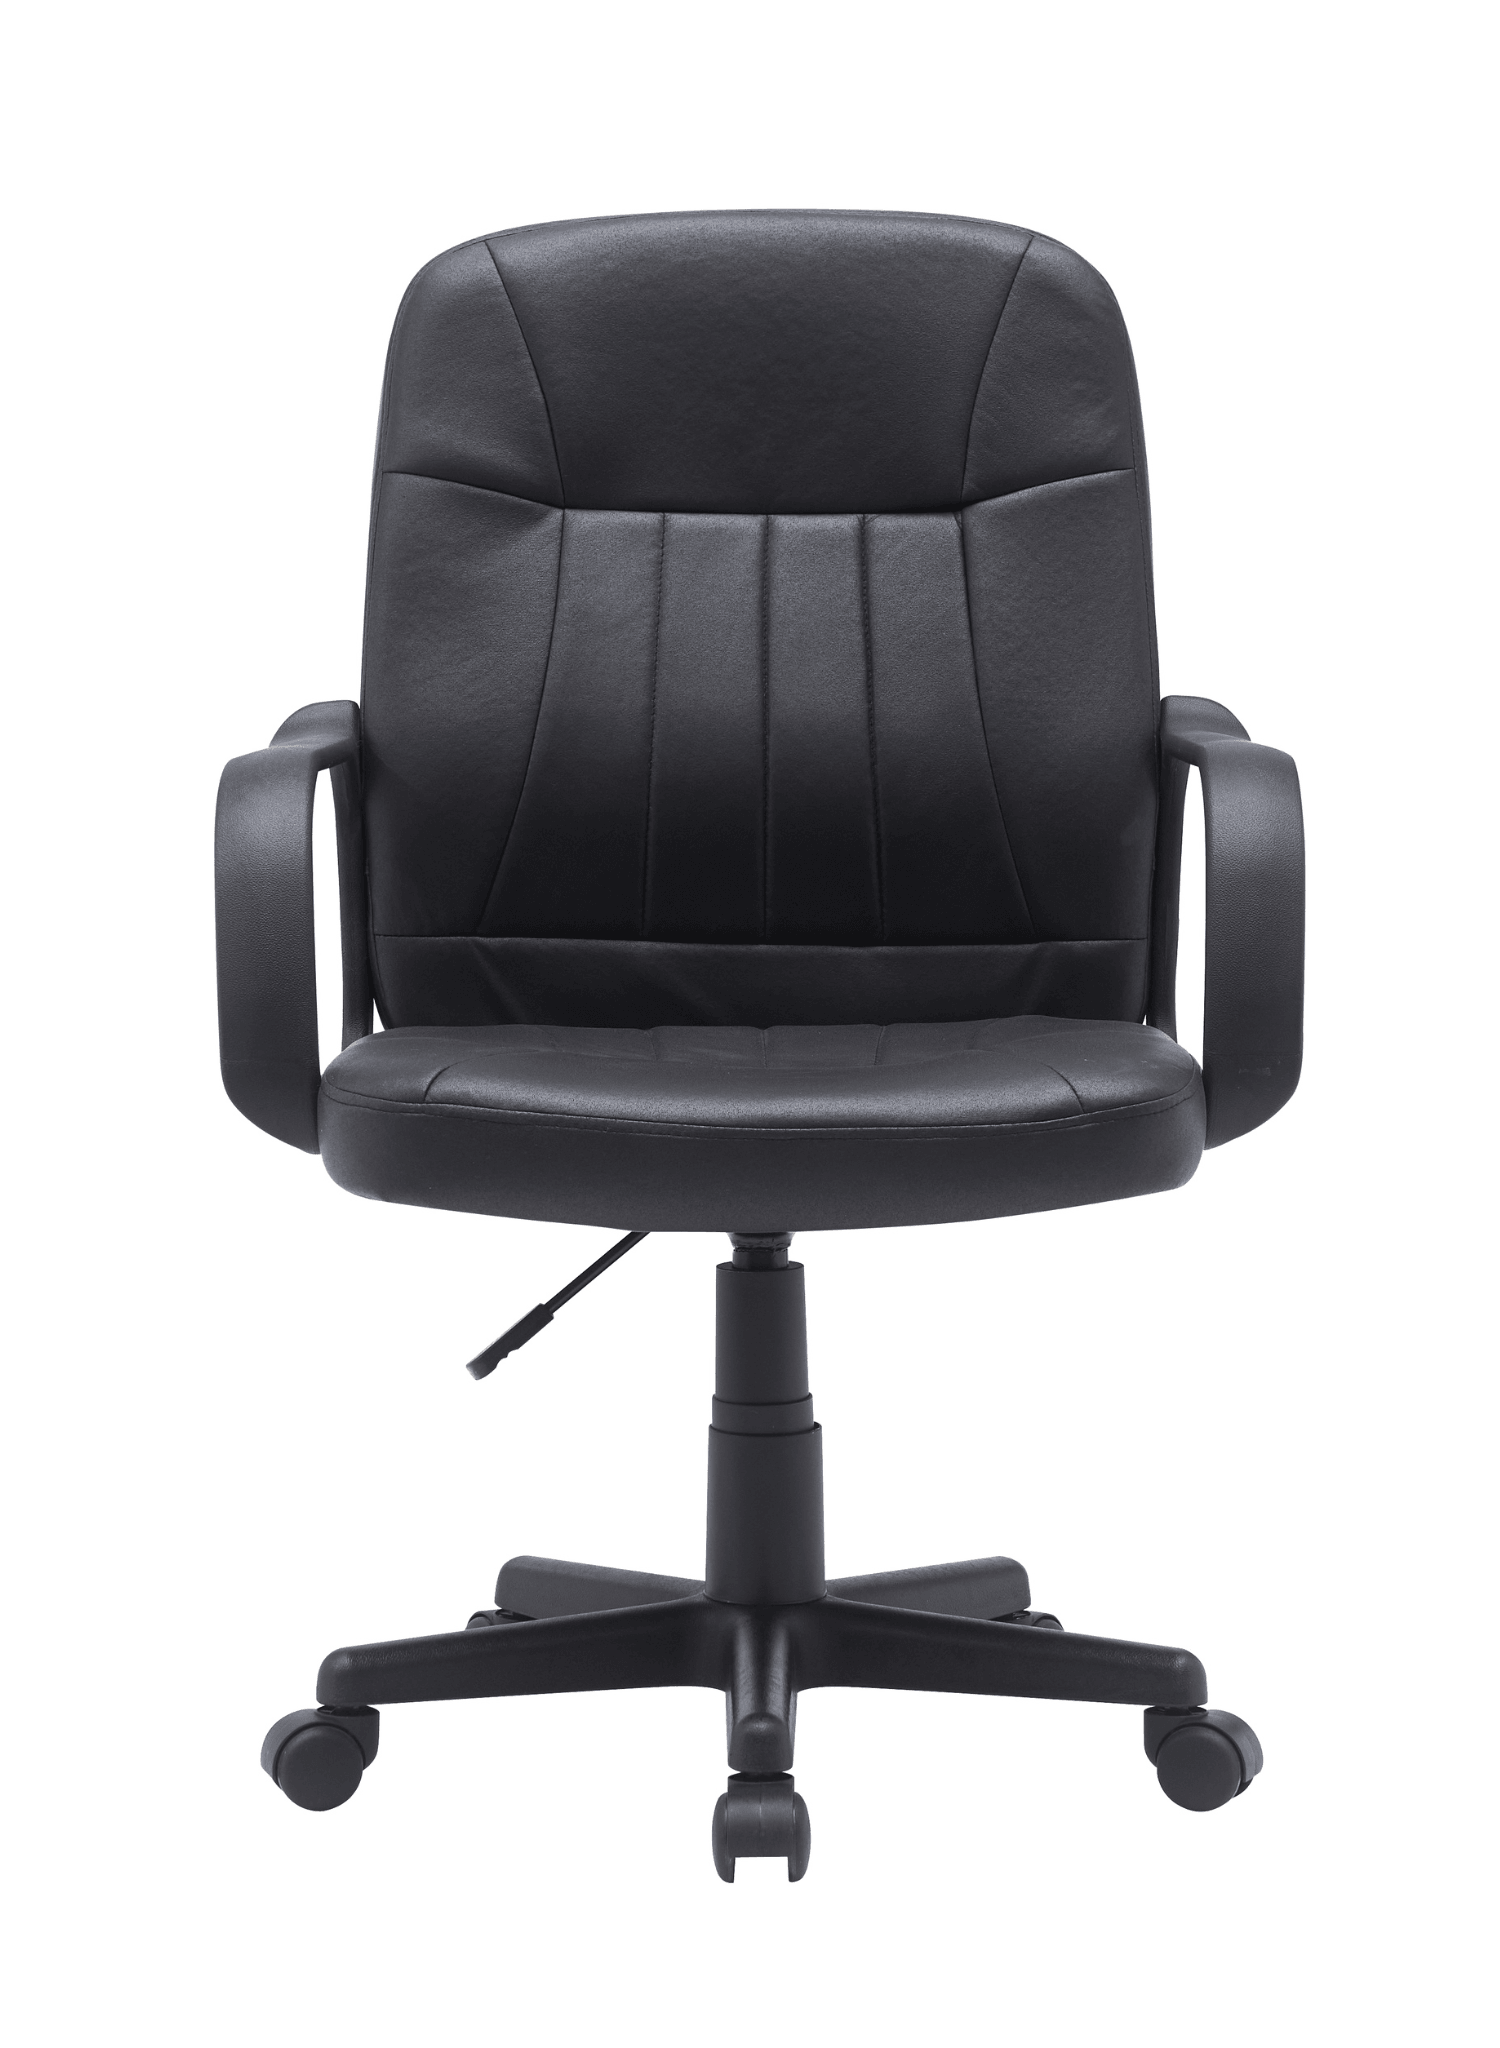 Clontarf Office Chair - Black Technology Fabric - Adjustable Height - Reclining Feature - Home Office Furniture